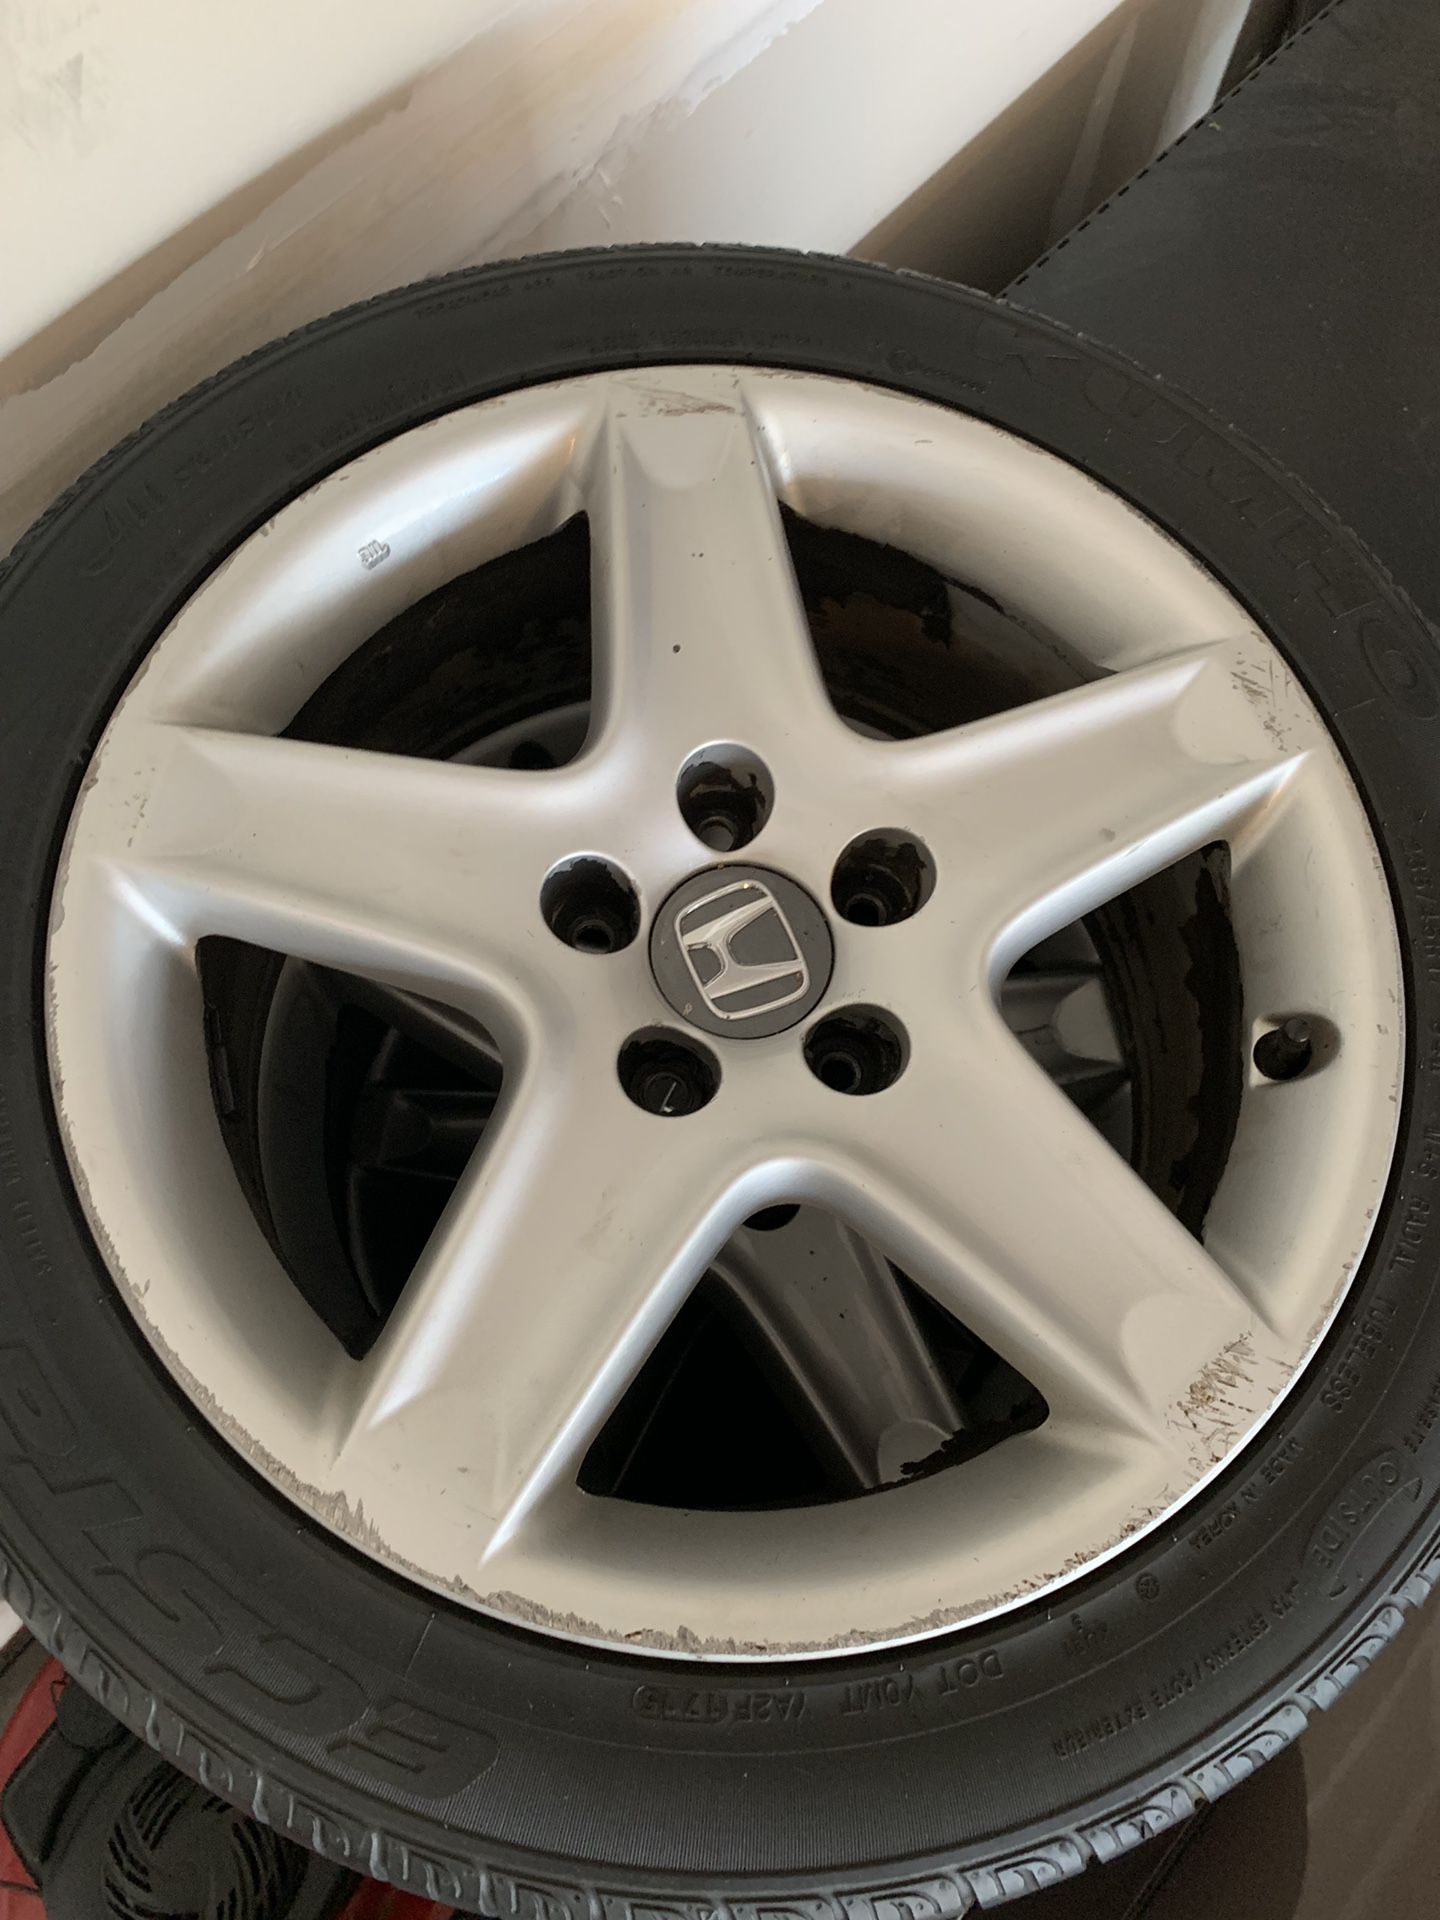 2005 Acura TL Wheels and Tires